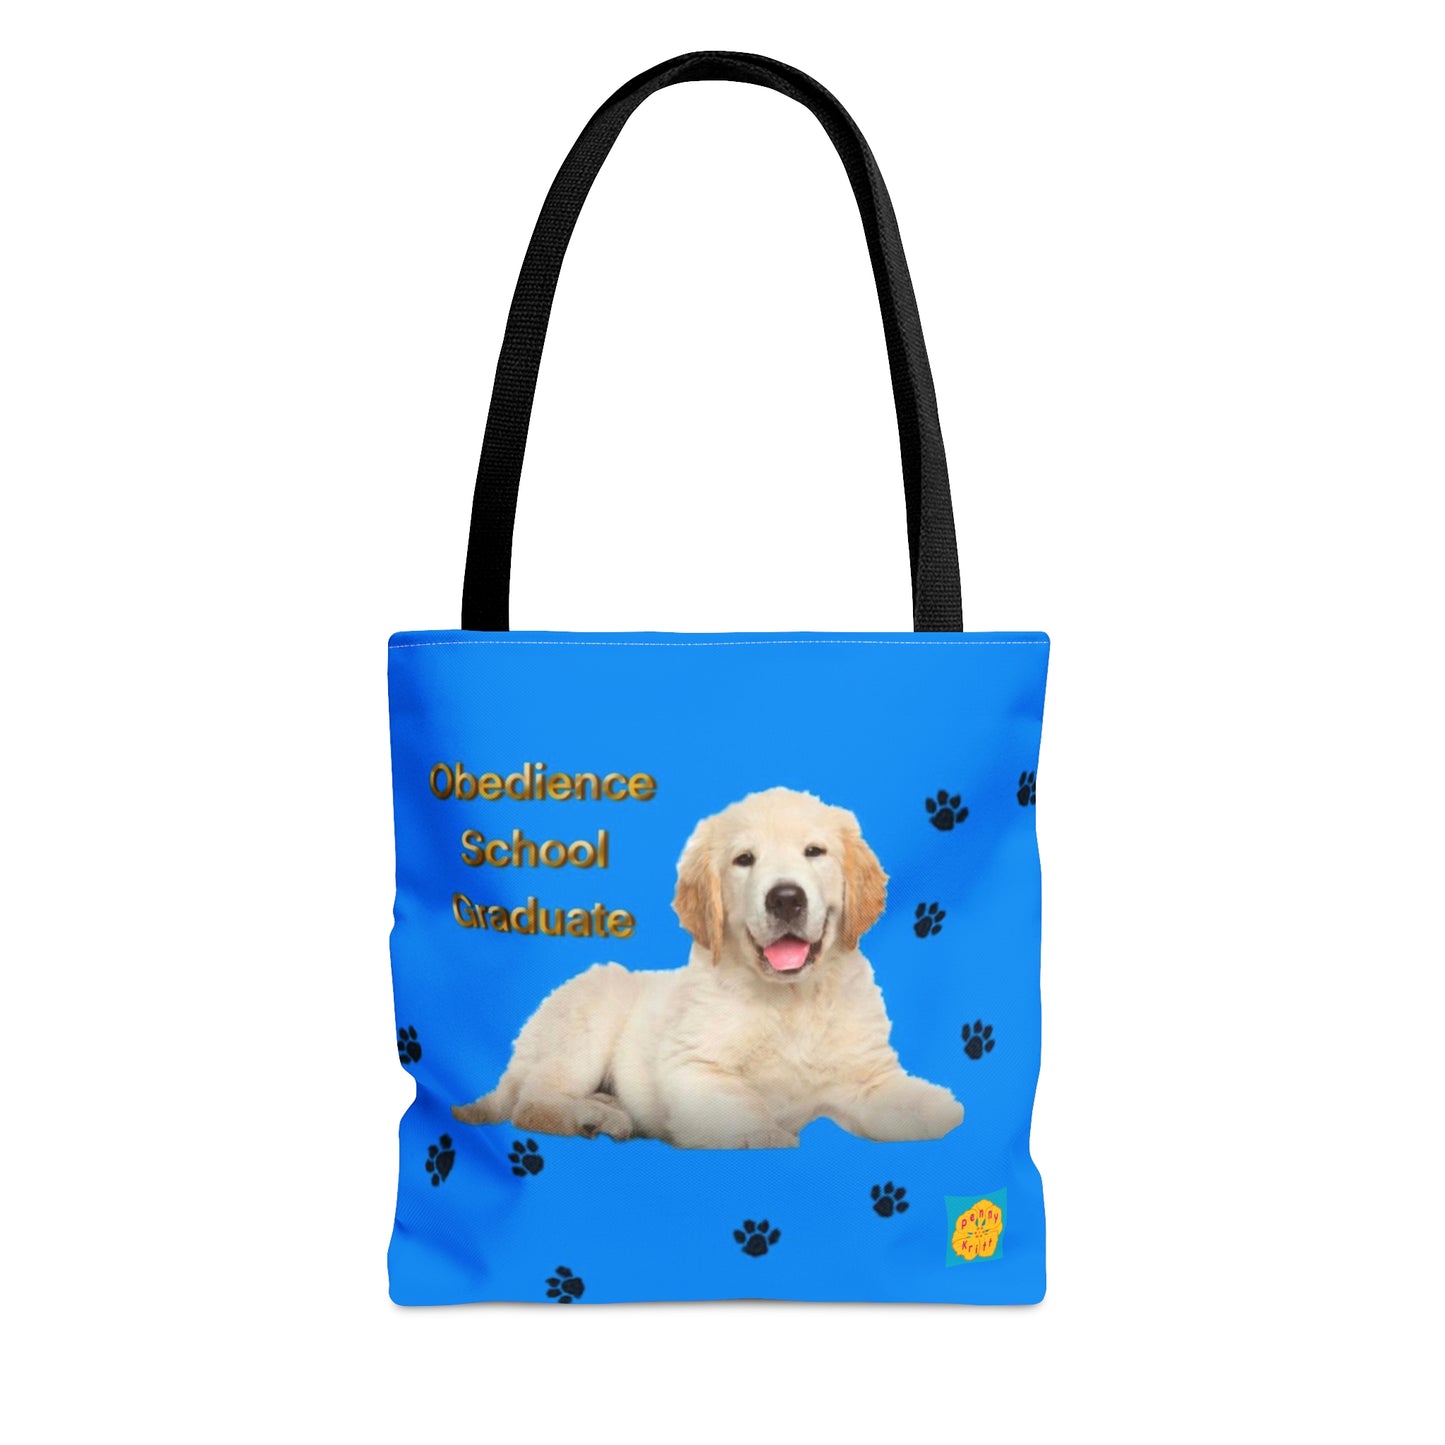 Obedience School Graduate Long Strapped Tote